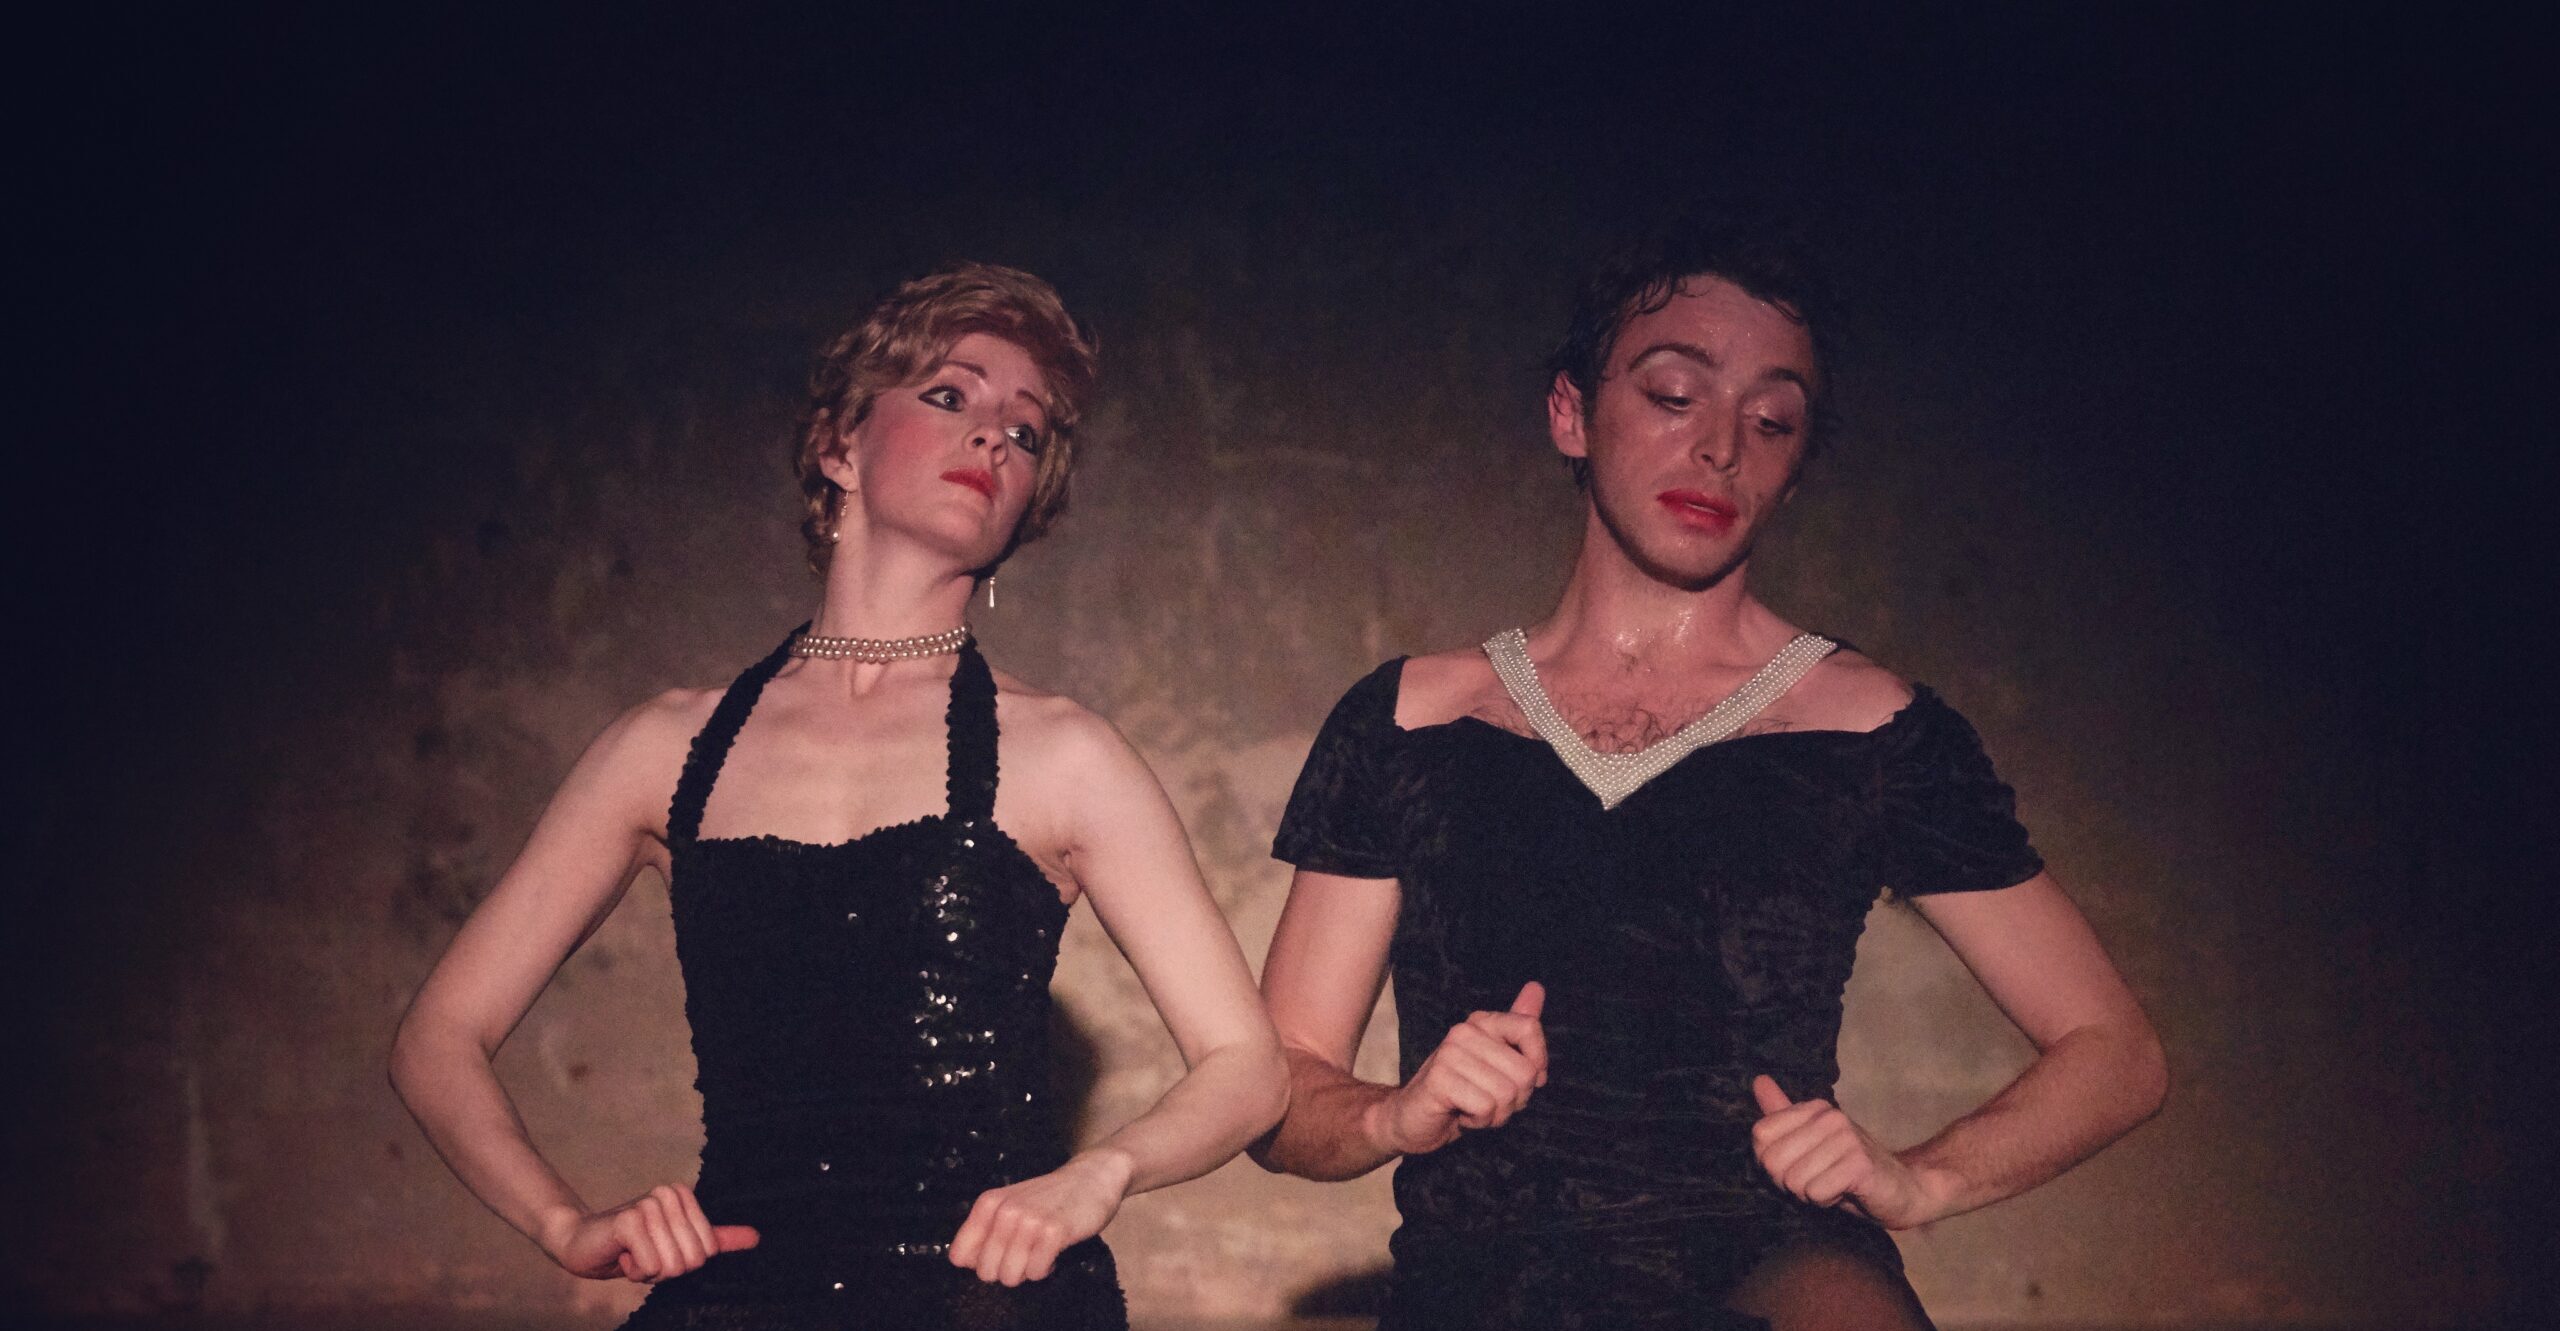 Two white performers sit on a wooden bench in black formal dresses and high heels. Daniel wears red lipstick and a necklace. Eleanor wears a blond wig like Princess Diana.  